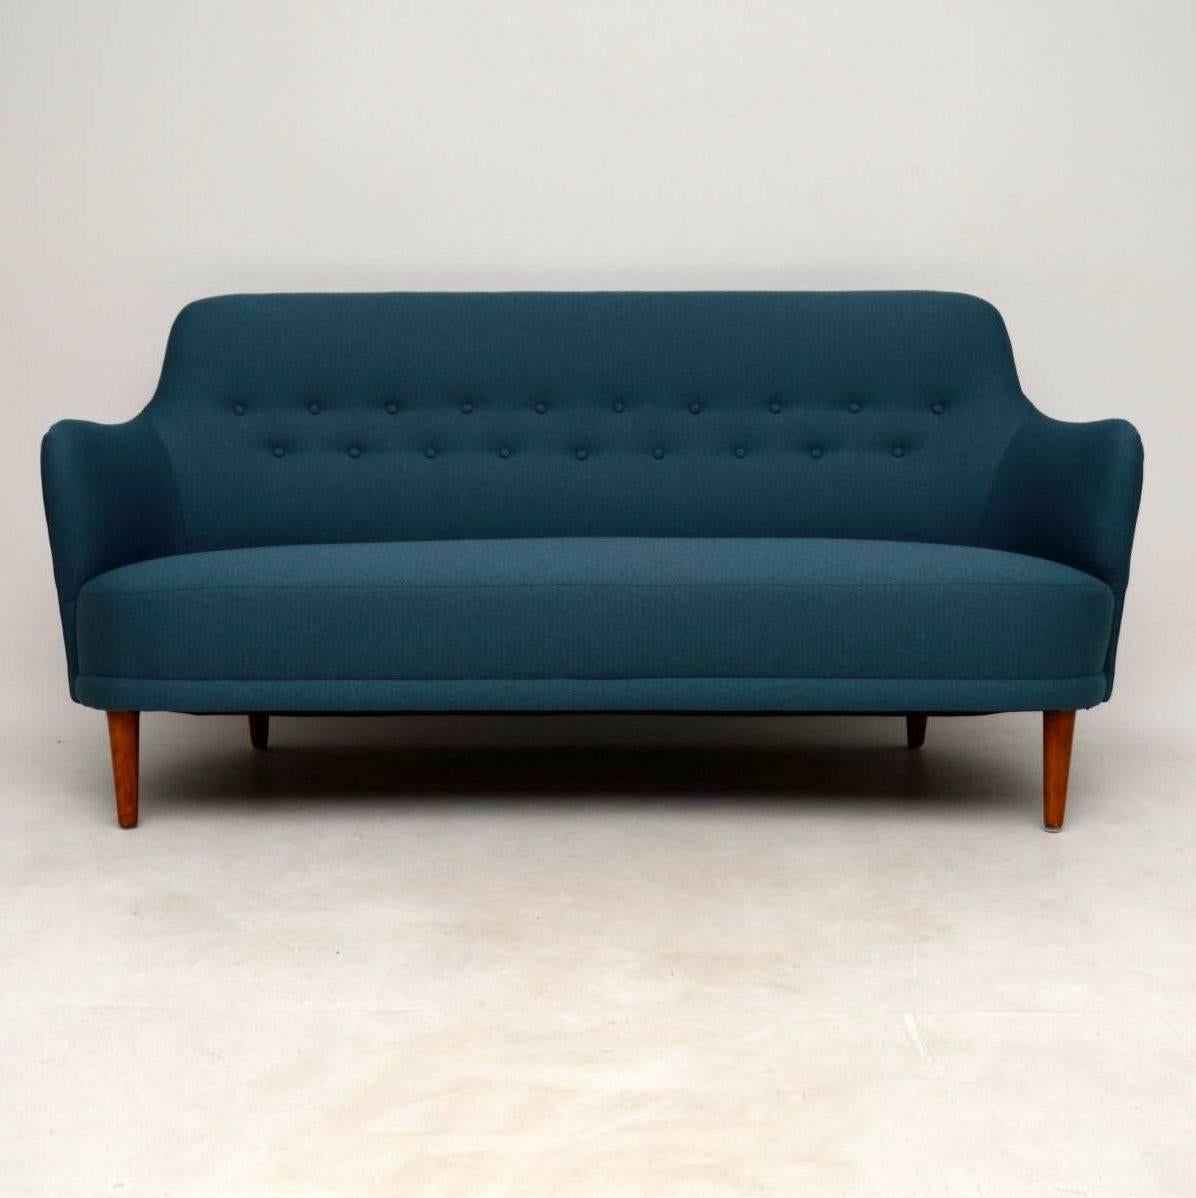 A stunning vintage Swedish sofa, this is an original ‘Samsas’ sofa, by Carl Malmsten. It was designed and made in Sweden in the 1960s. The quality is absolutely superb and it’s extremely comfortable. We have had this newly upholstered in a beautiful